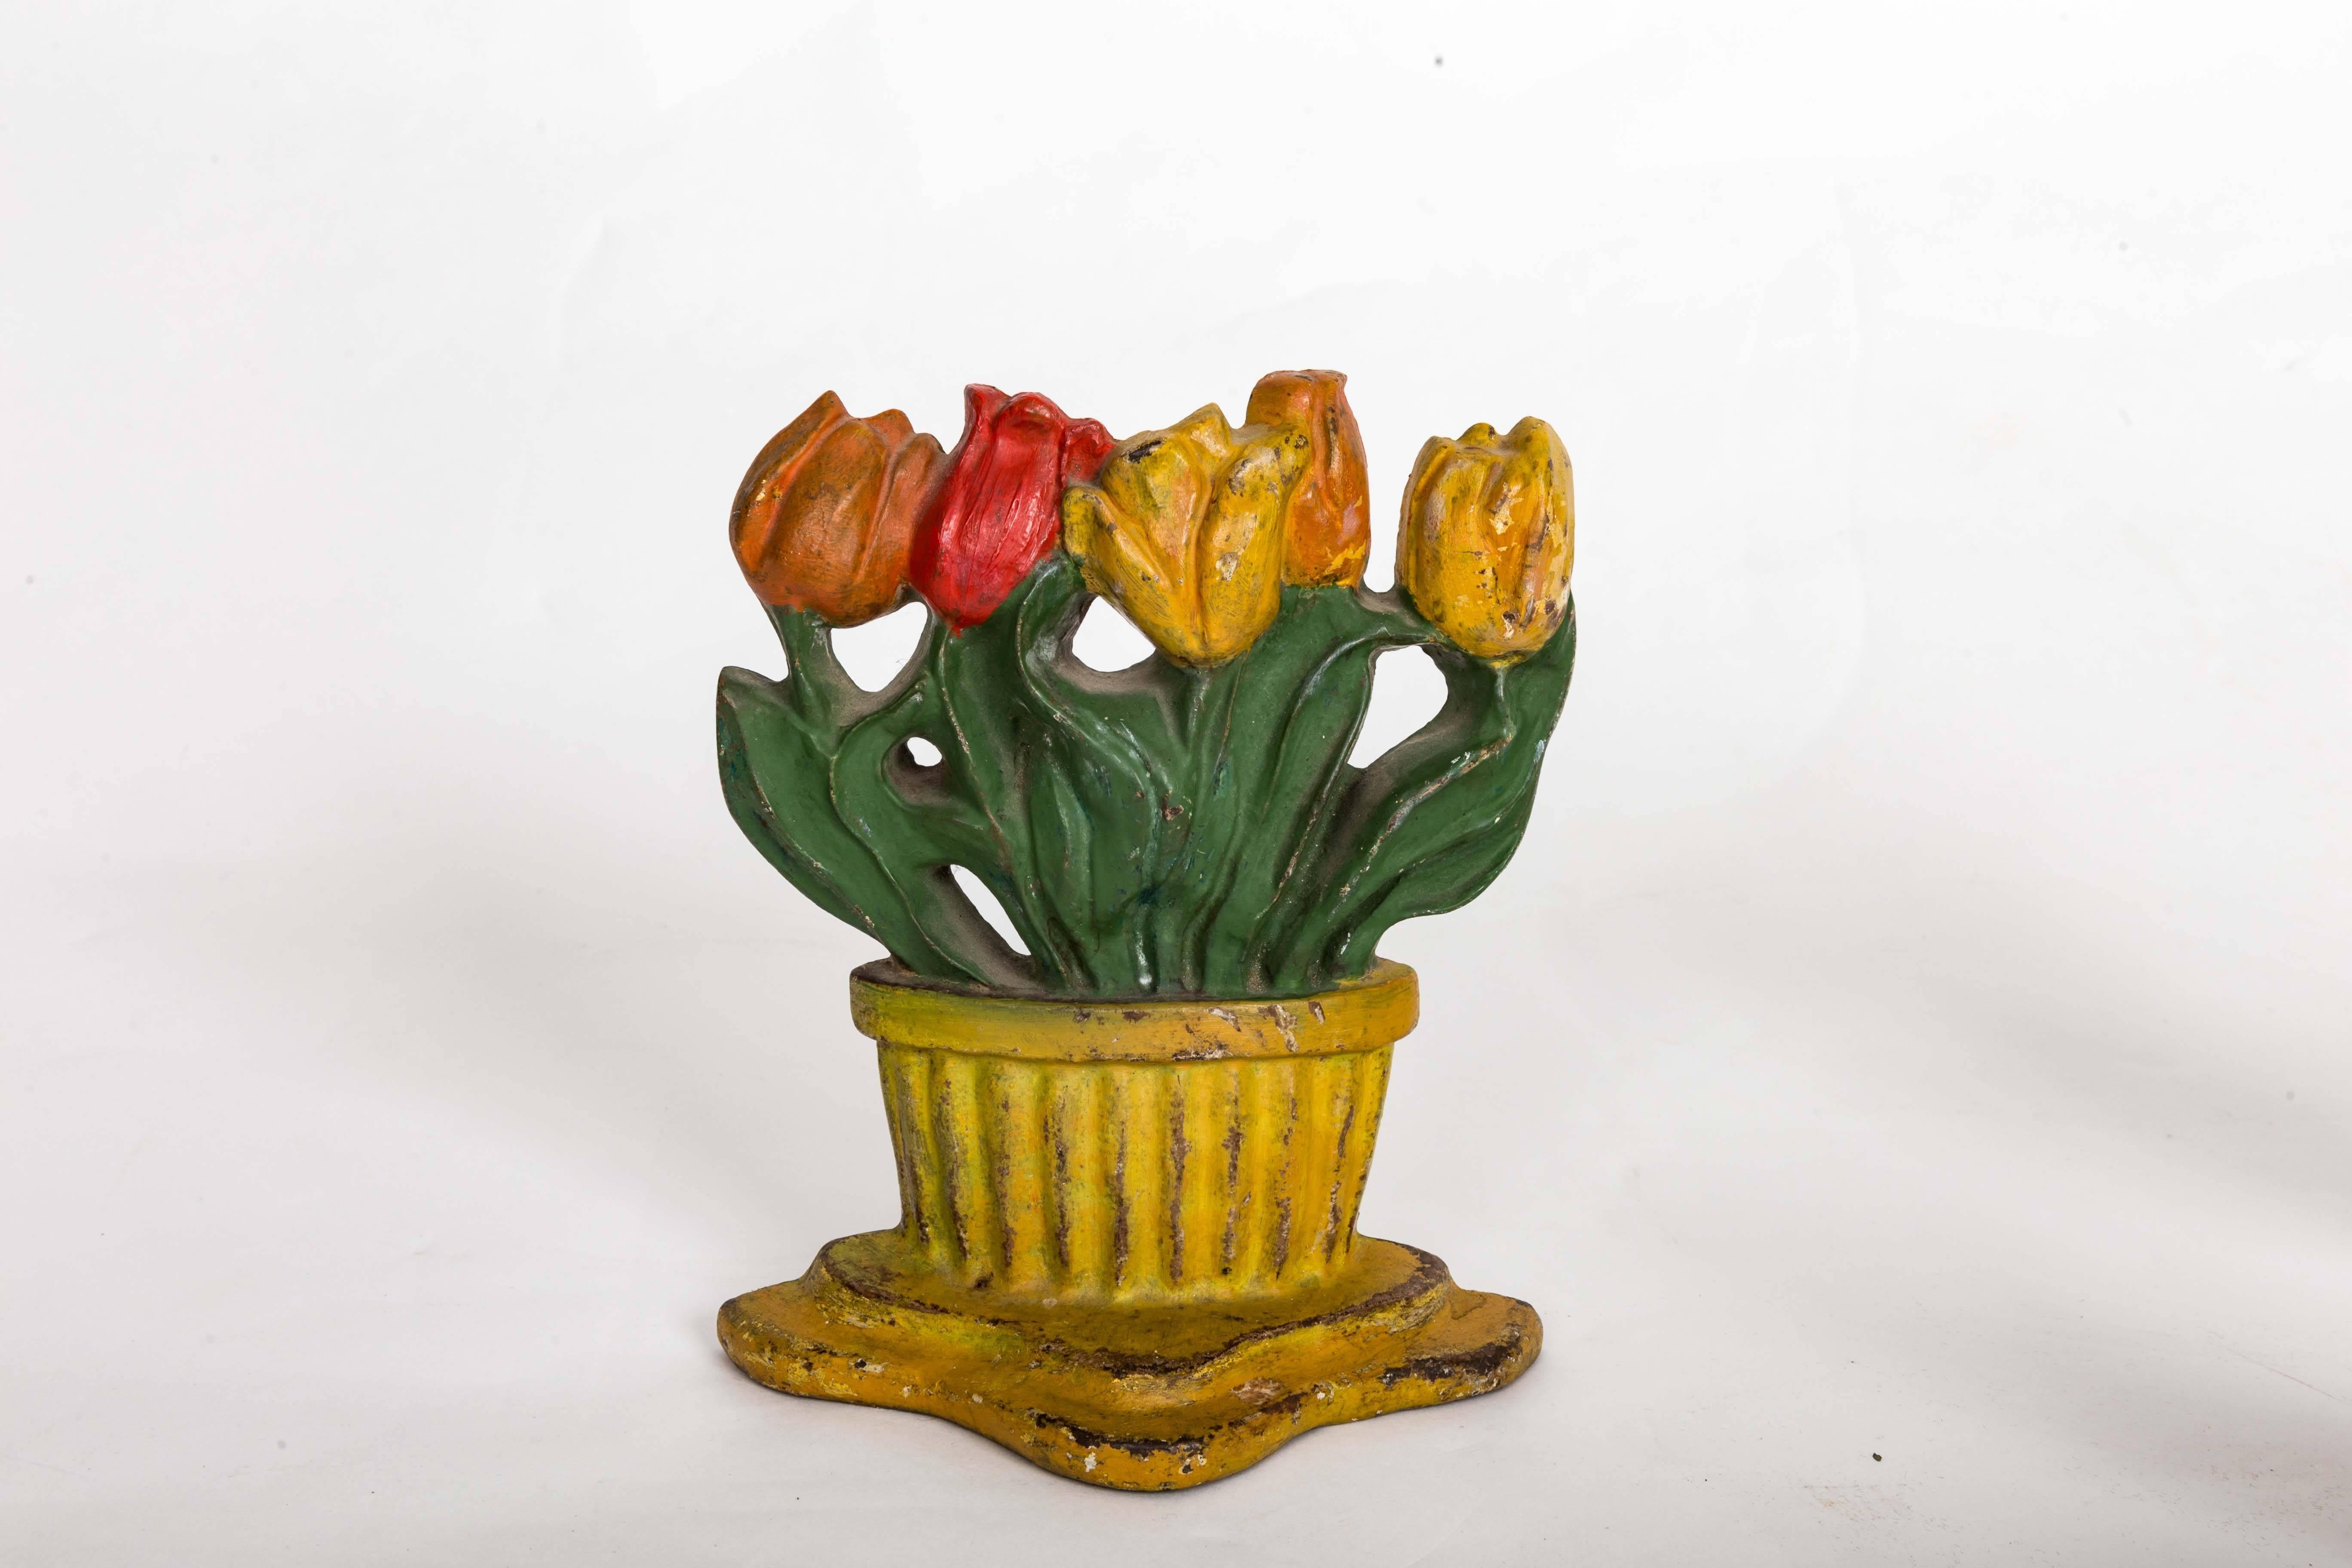 Group of five early 20th century painted cast iron door stops. (Tulips in Yellow Basket Sold)

